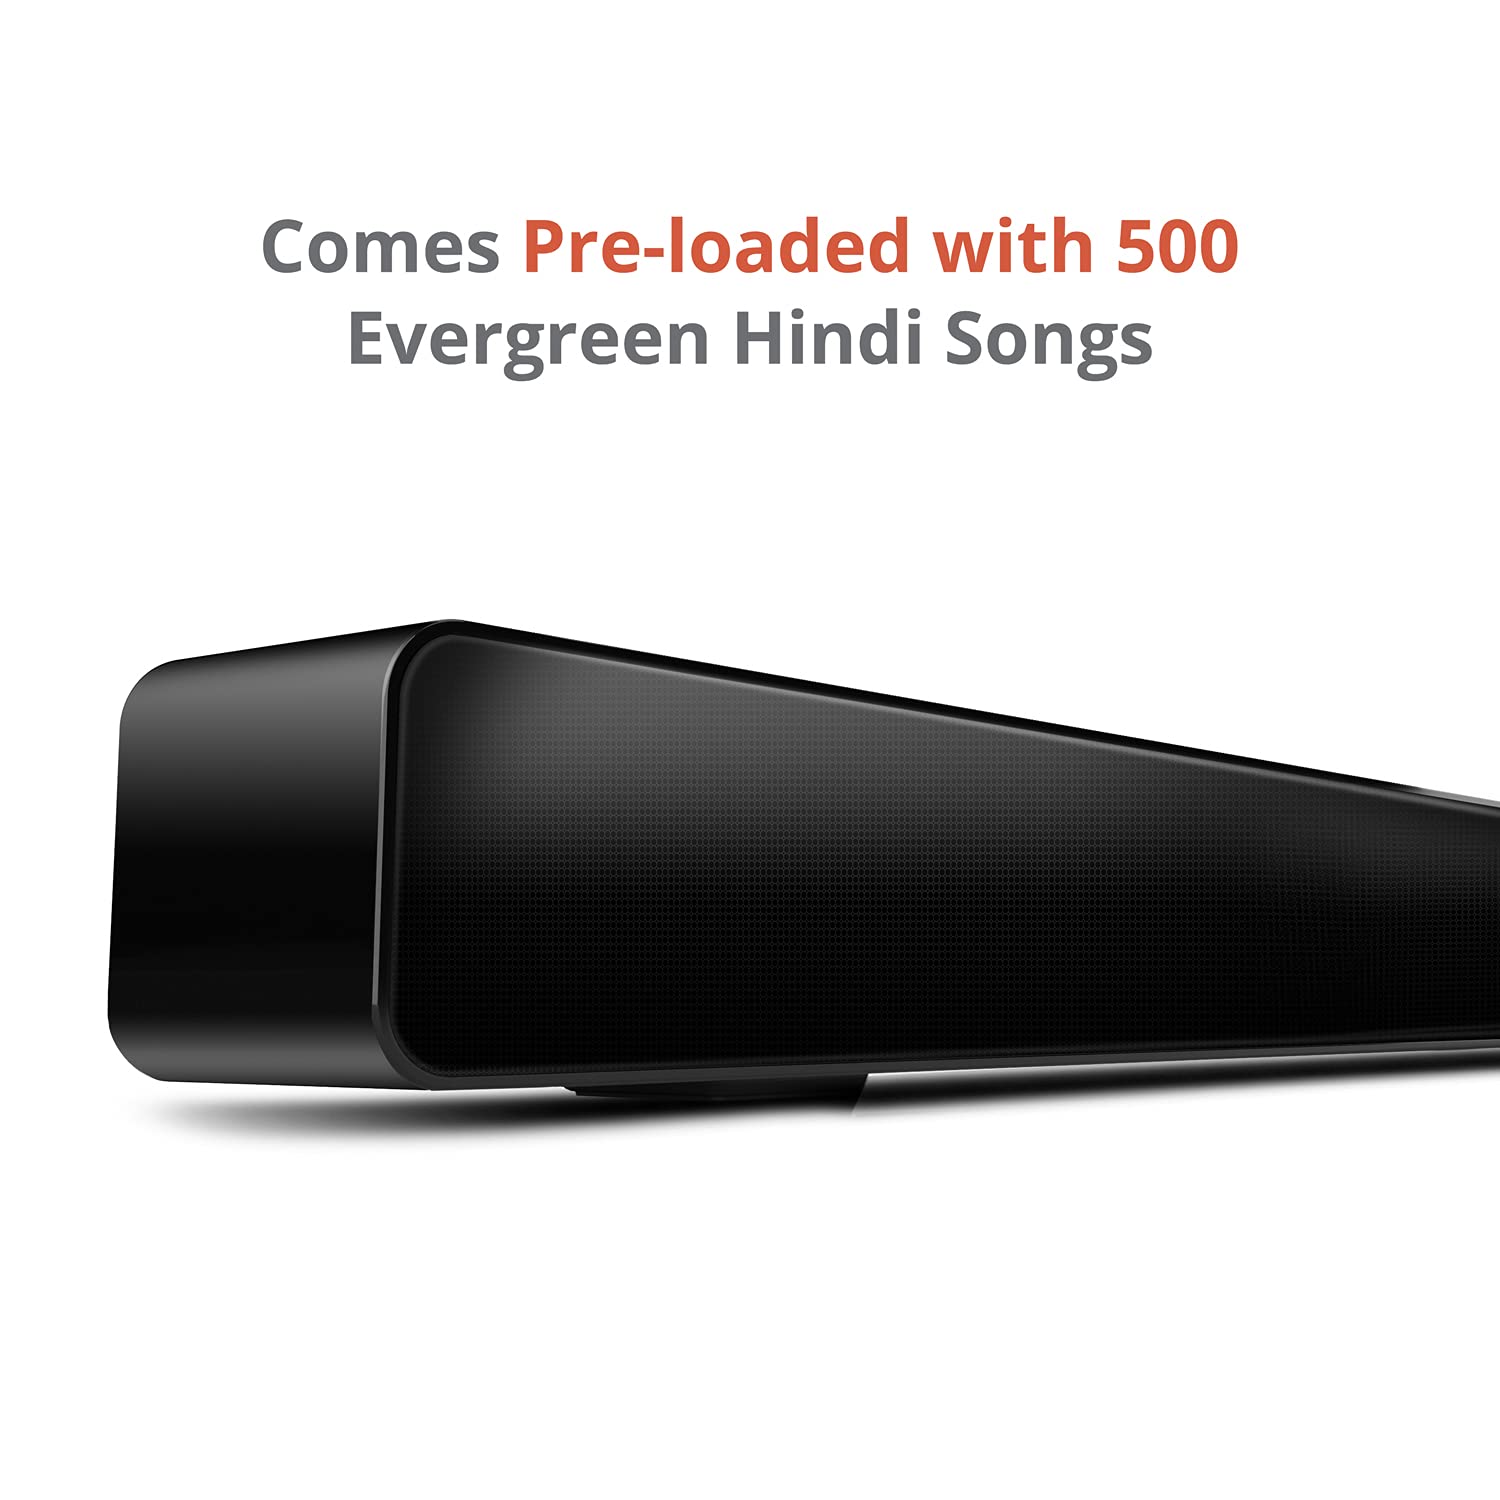 Amazon Navratri Sale: Take Home BOAT Soundbar For Less Than Rs 4,000 - All You Need To Know